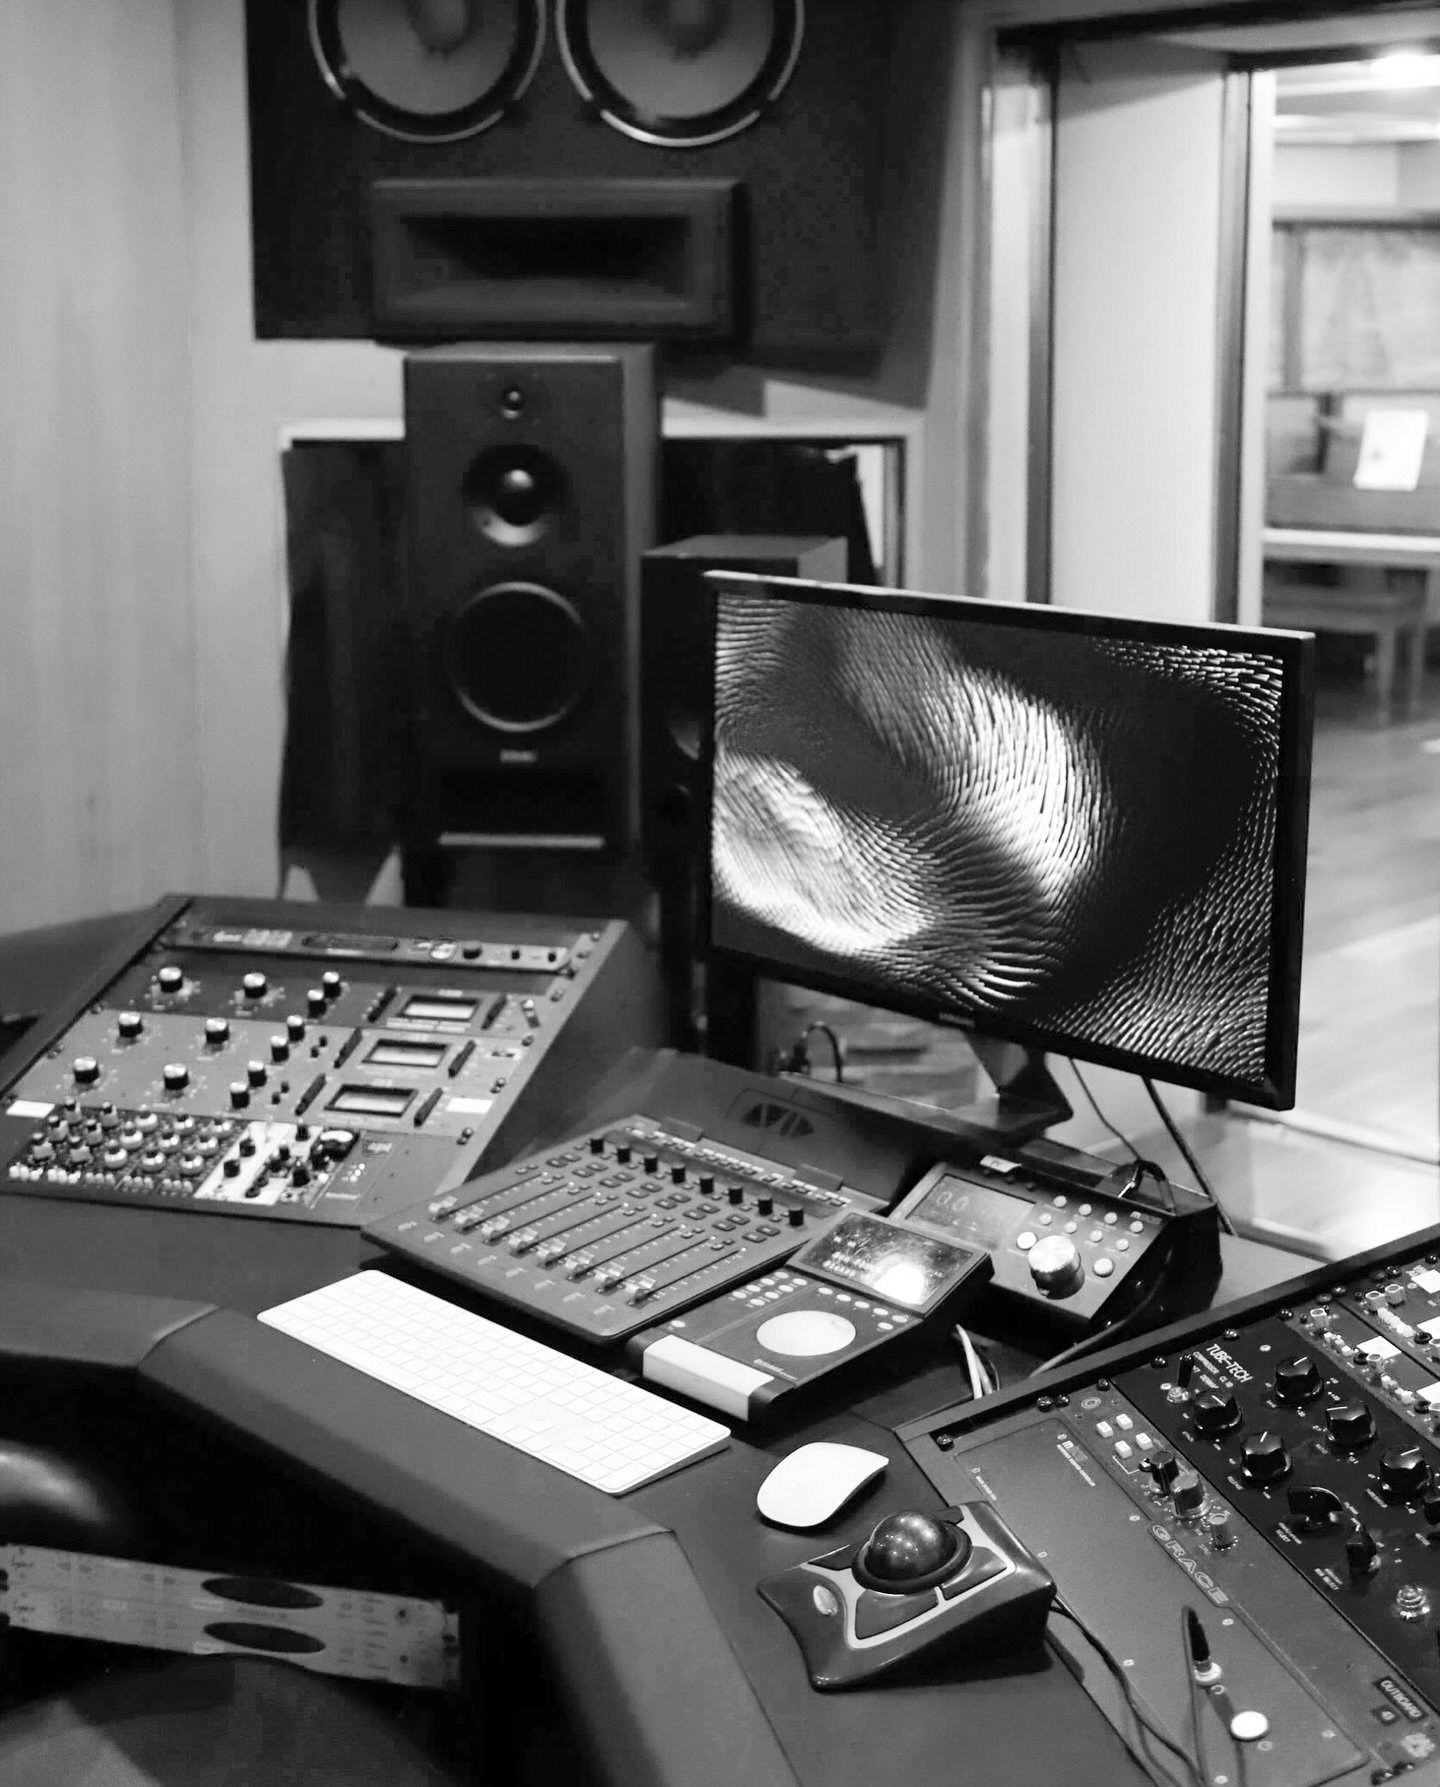 Create your next recording project with us. Work on new music, podcasts, and more with state-of-the-art equipment and sound quality.